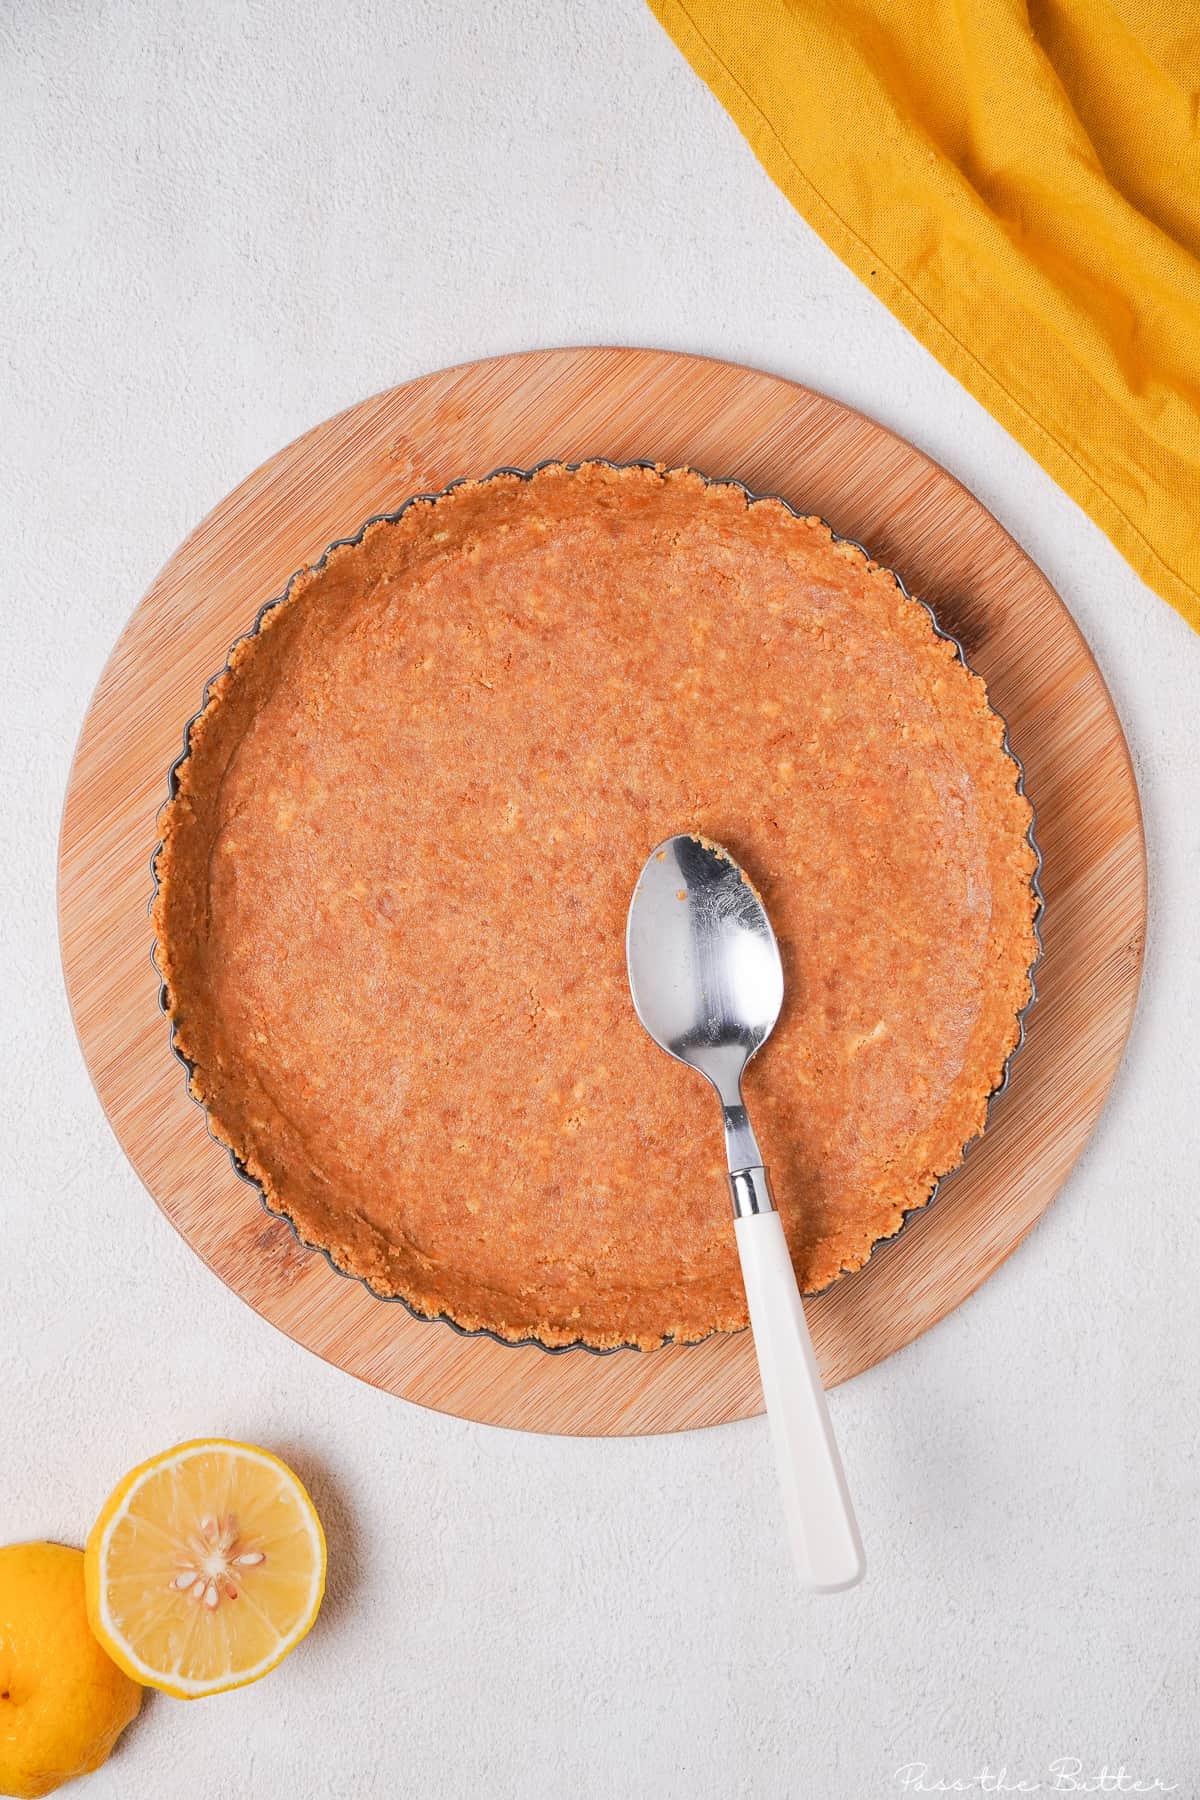 Graham cracker crust in pie plate with spoon.